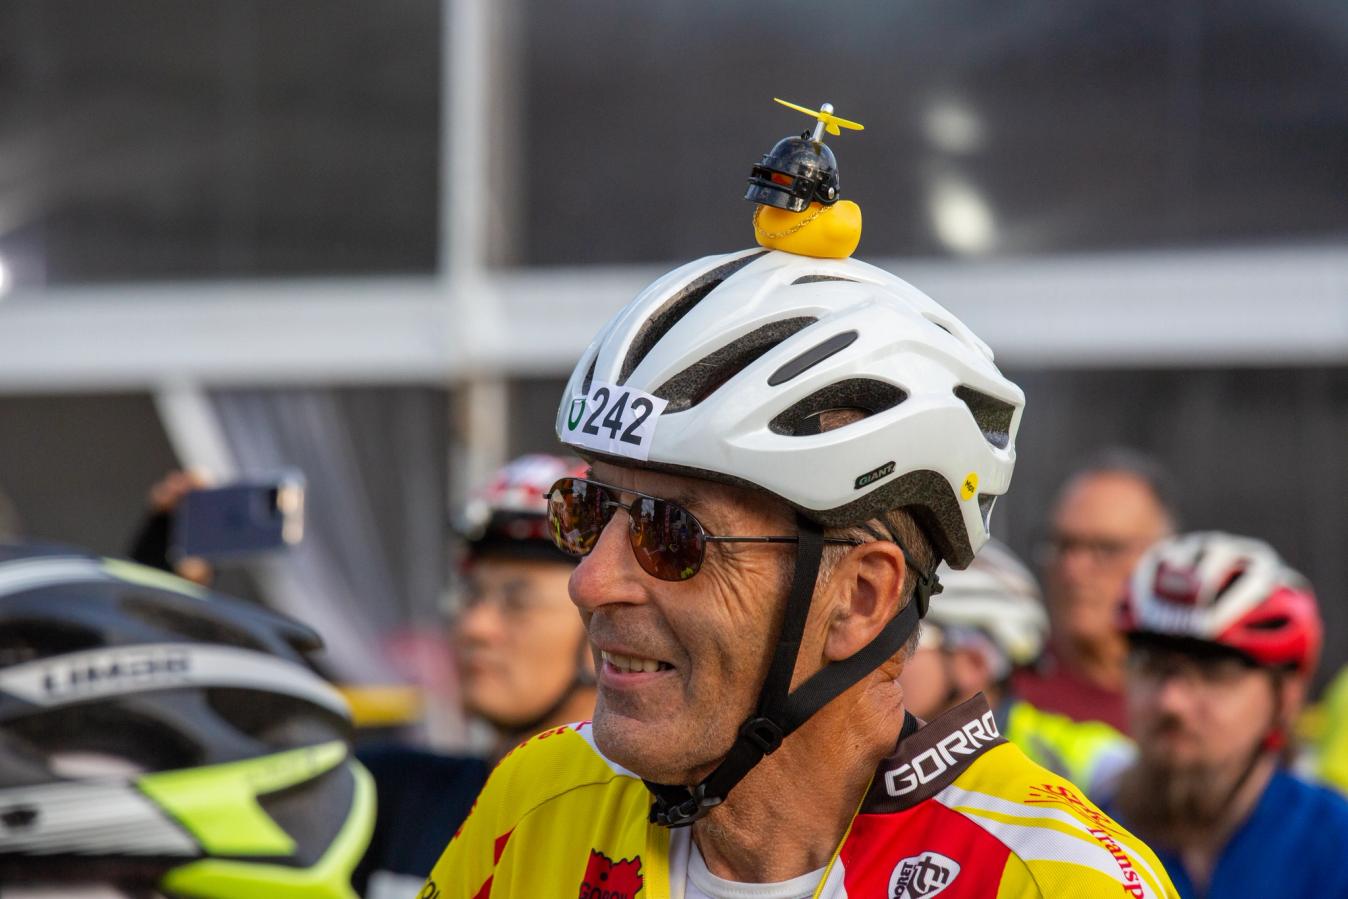 A man with a small rubber duck on his helmet